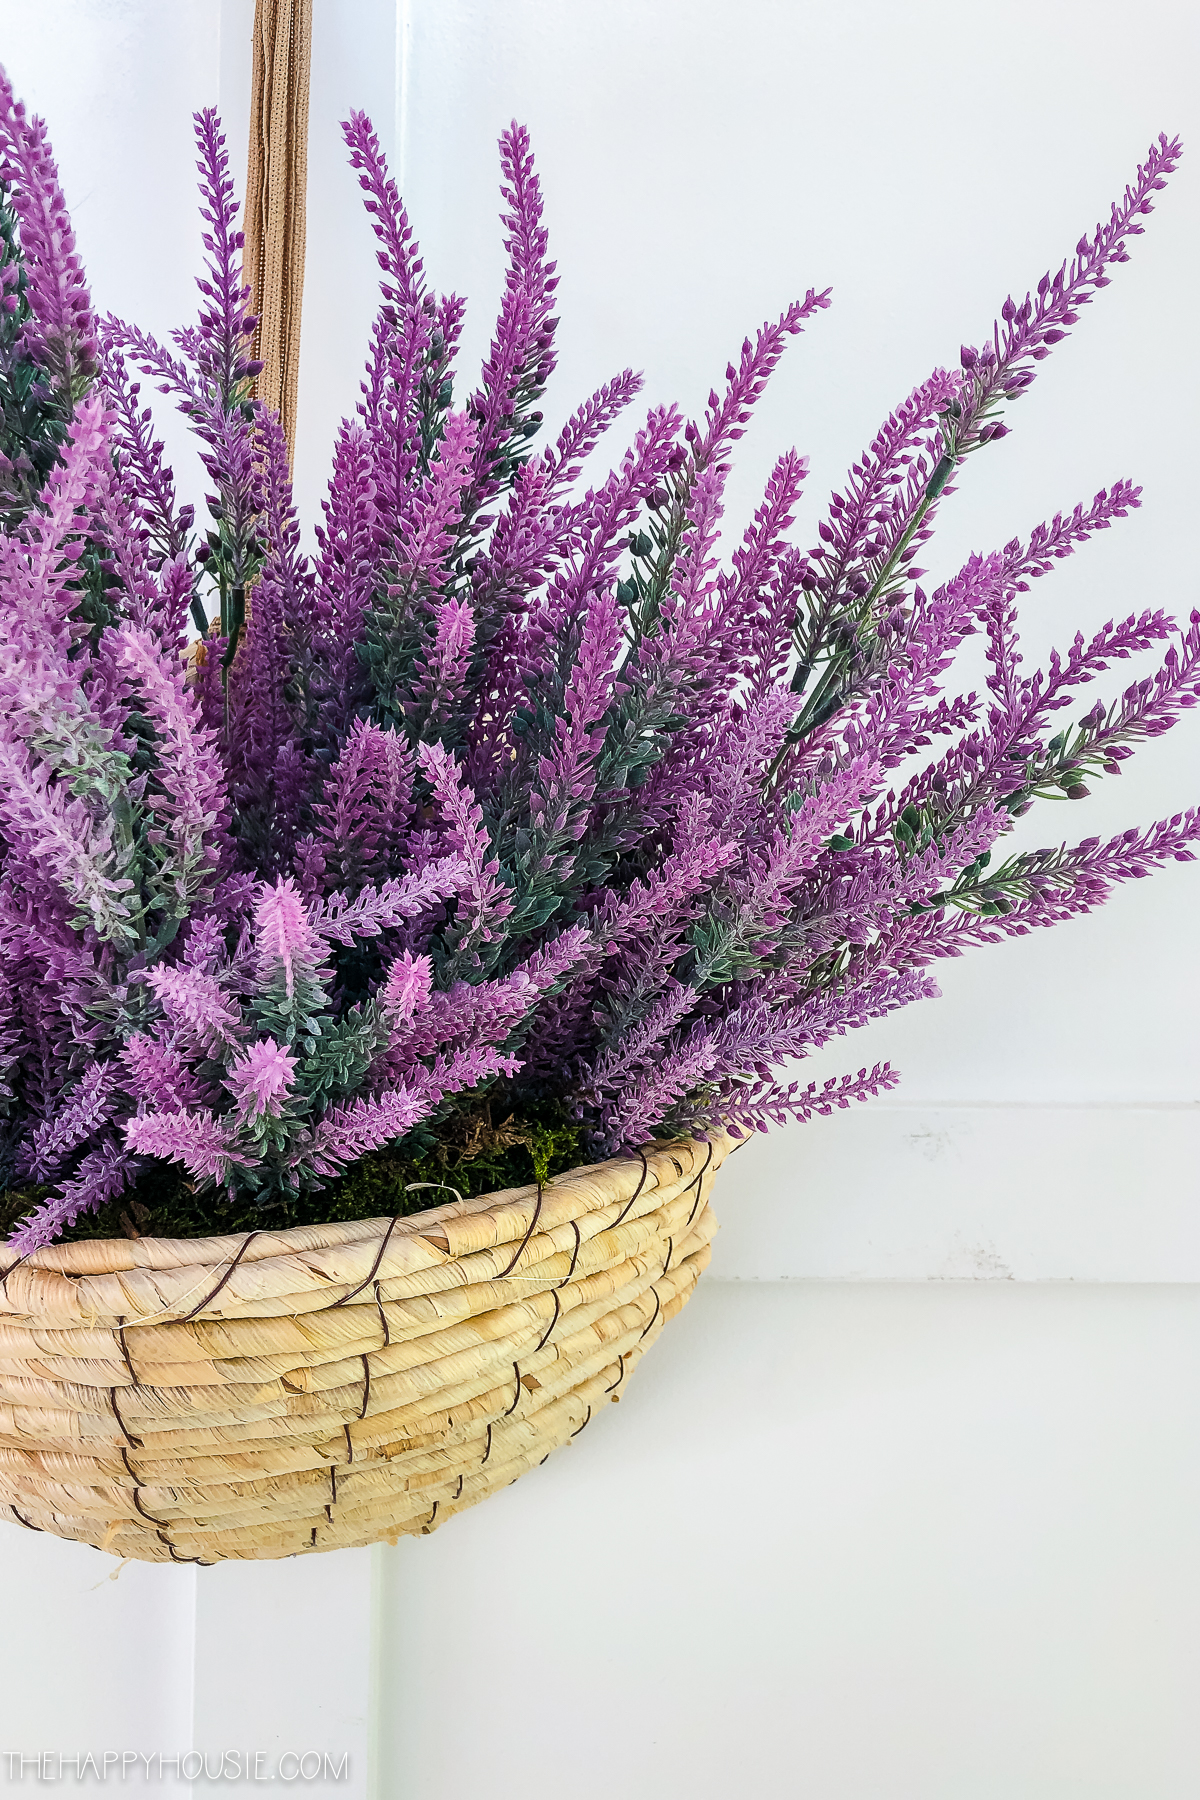 Beautiful purple lavender in the basket from the dollar store.